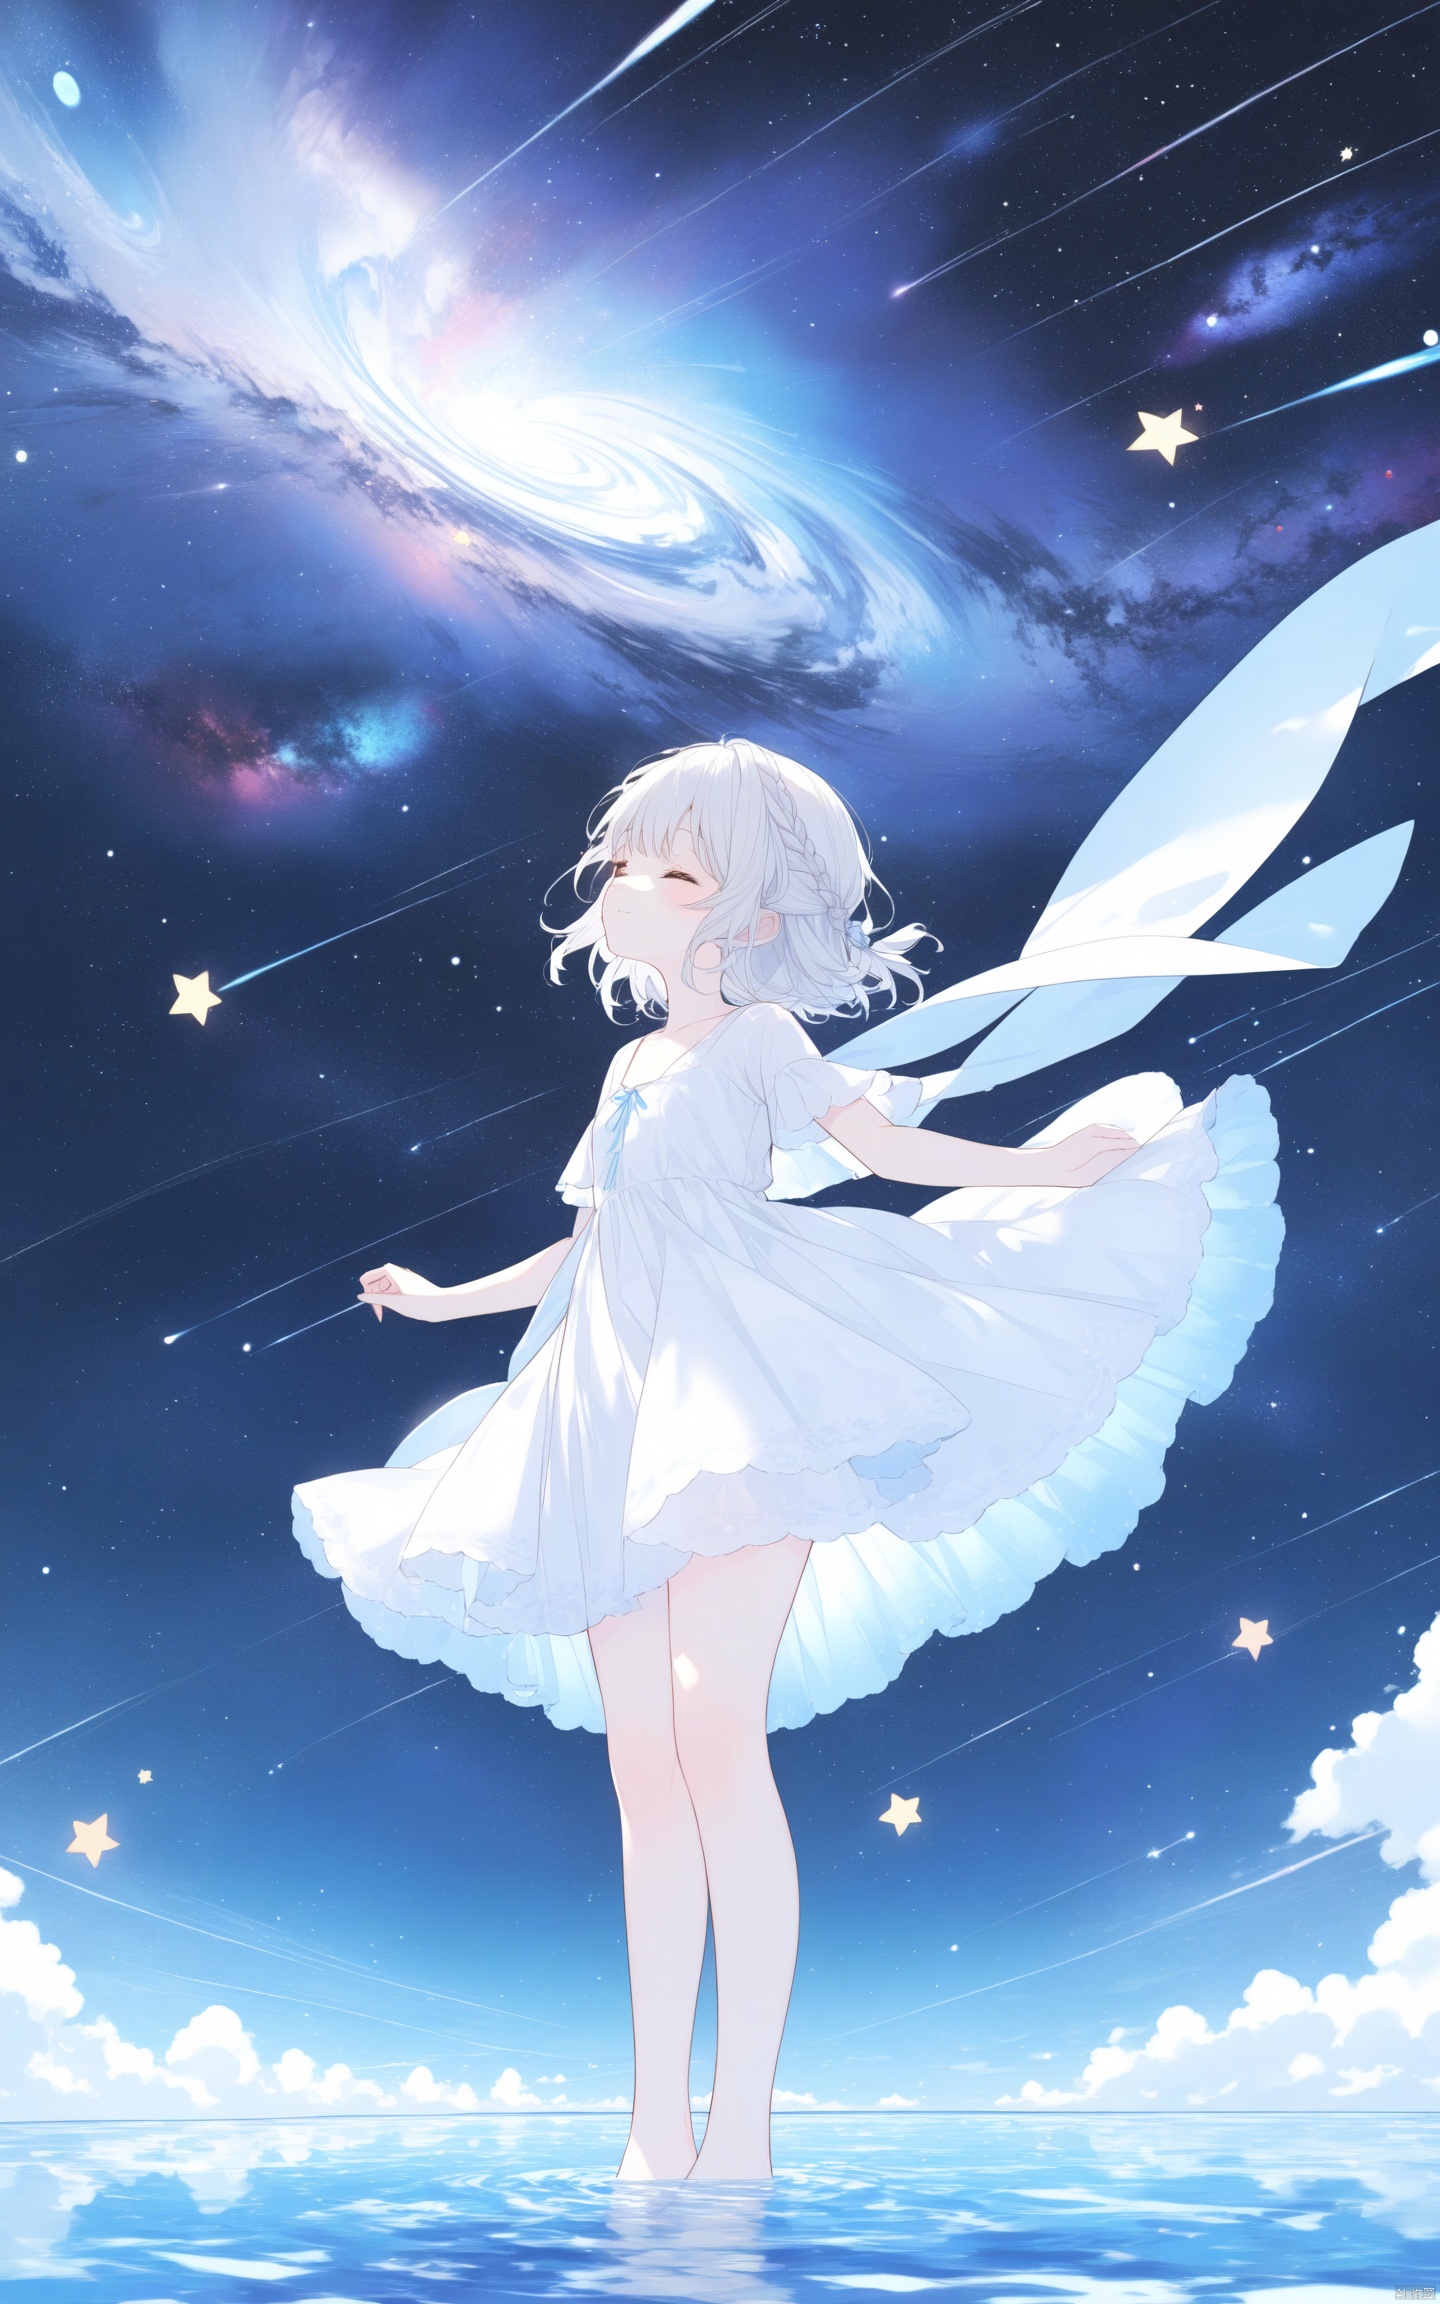  (masterpiece), (best quality), illustration, ultra detailed, hdr, Depth of field, (colorful), loli, ((an array of stars)), ((starry sky)), the Milky Way, star, Reflecting the starry water surface, (1girl:1.3), awhite hair, blinking, white dress, closed mouth, constel lation, white hair, braid, blinking, white robe, barefoot, float, flat color, looking up, standing, medium hair, standing, solo, space, universe, Nebula, many stars, fanxing